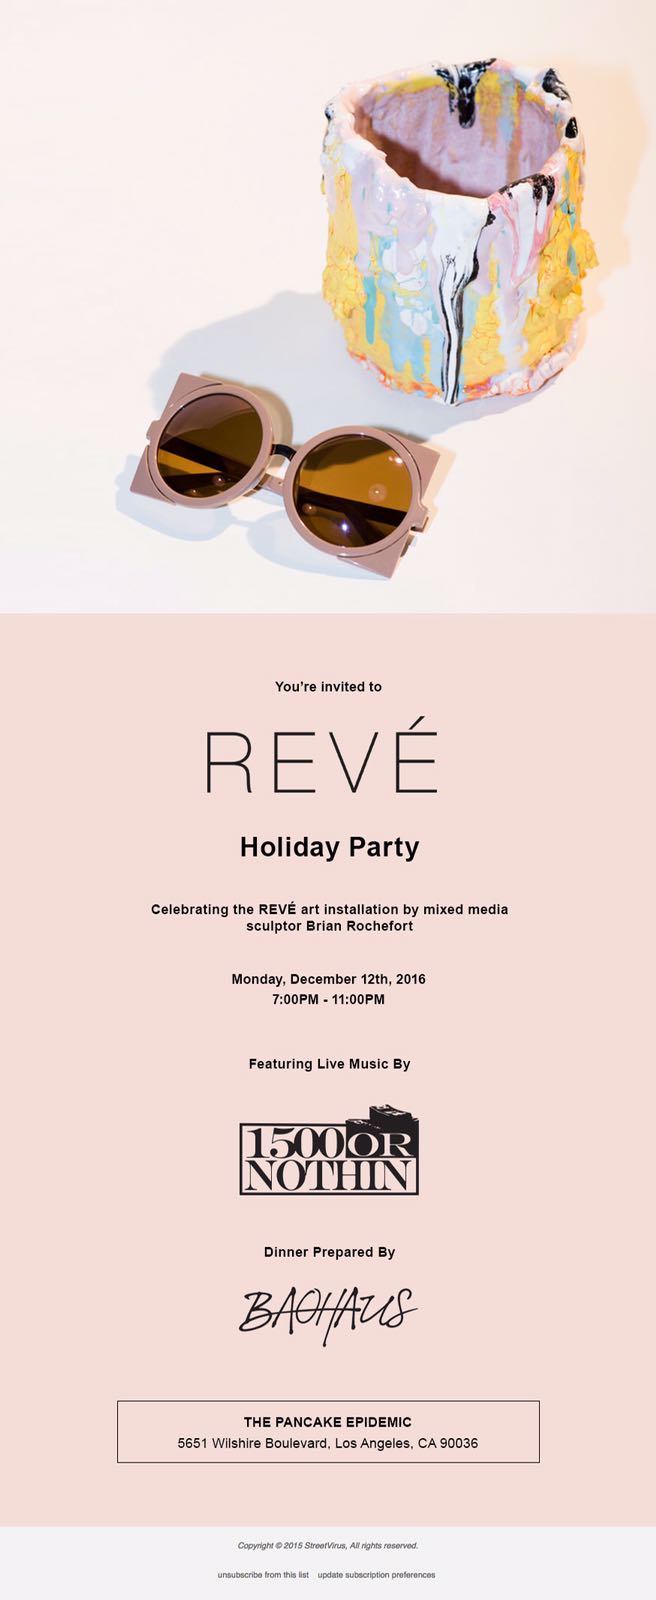 Reve holiday dinner performance collaboration with Pancake Epidemic and Brian Rochefort.